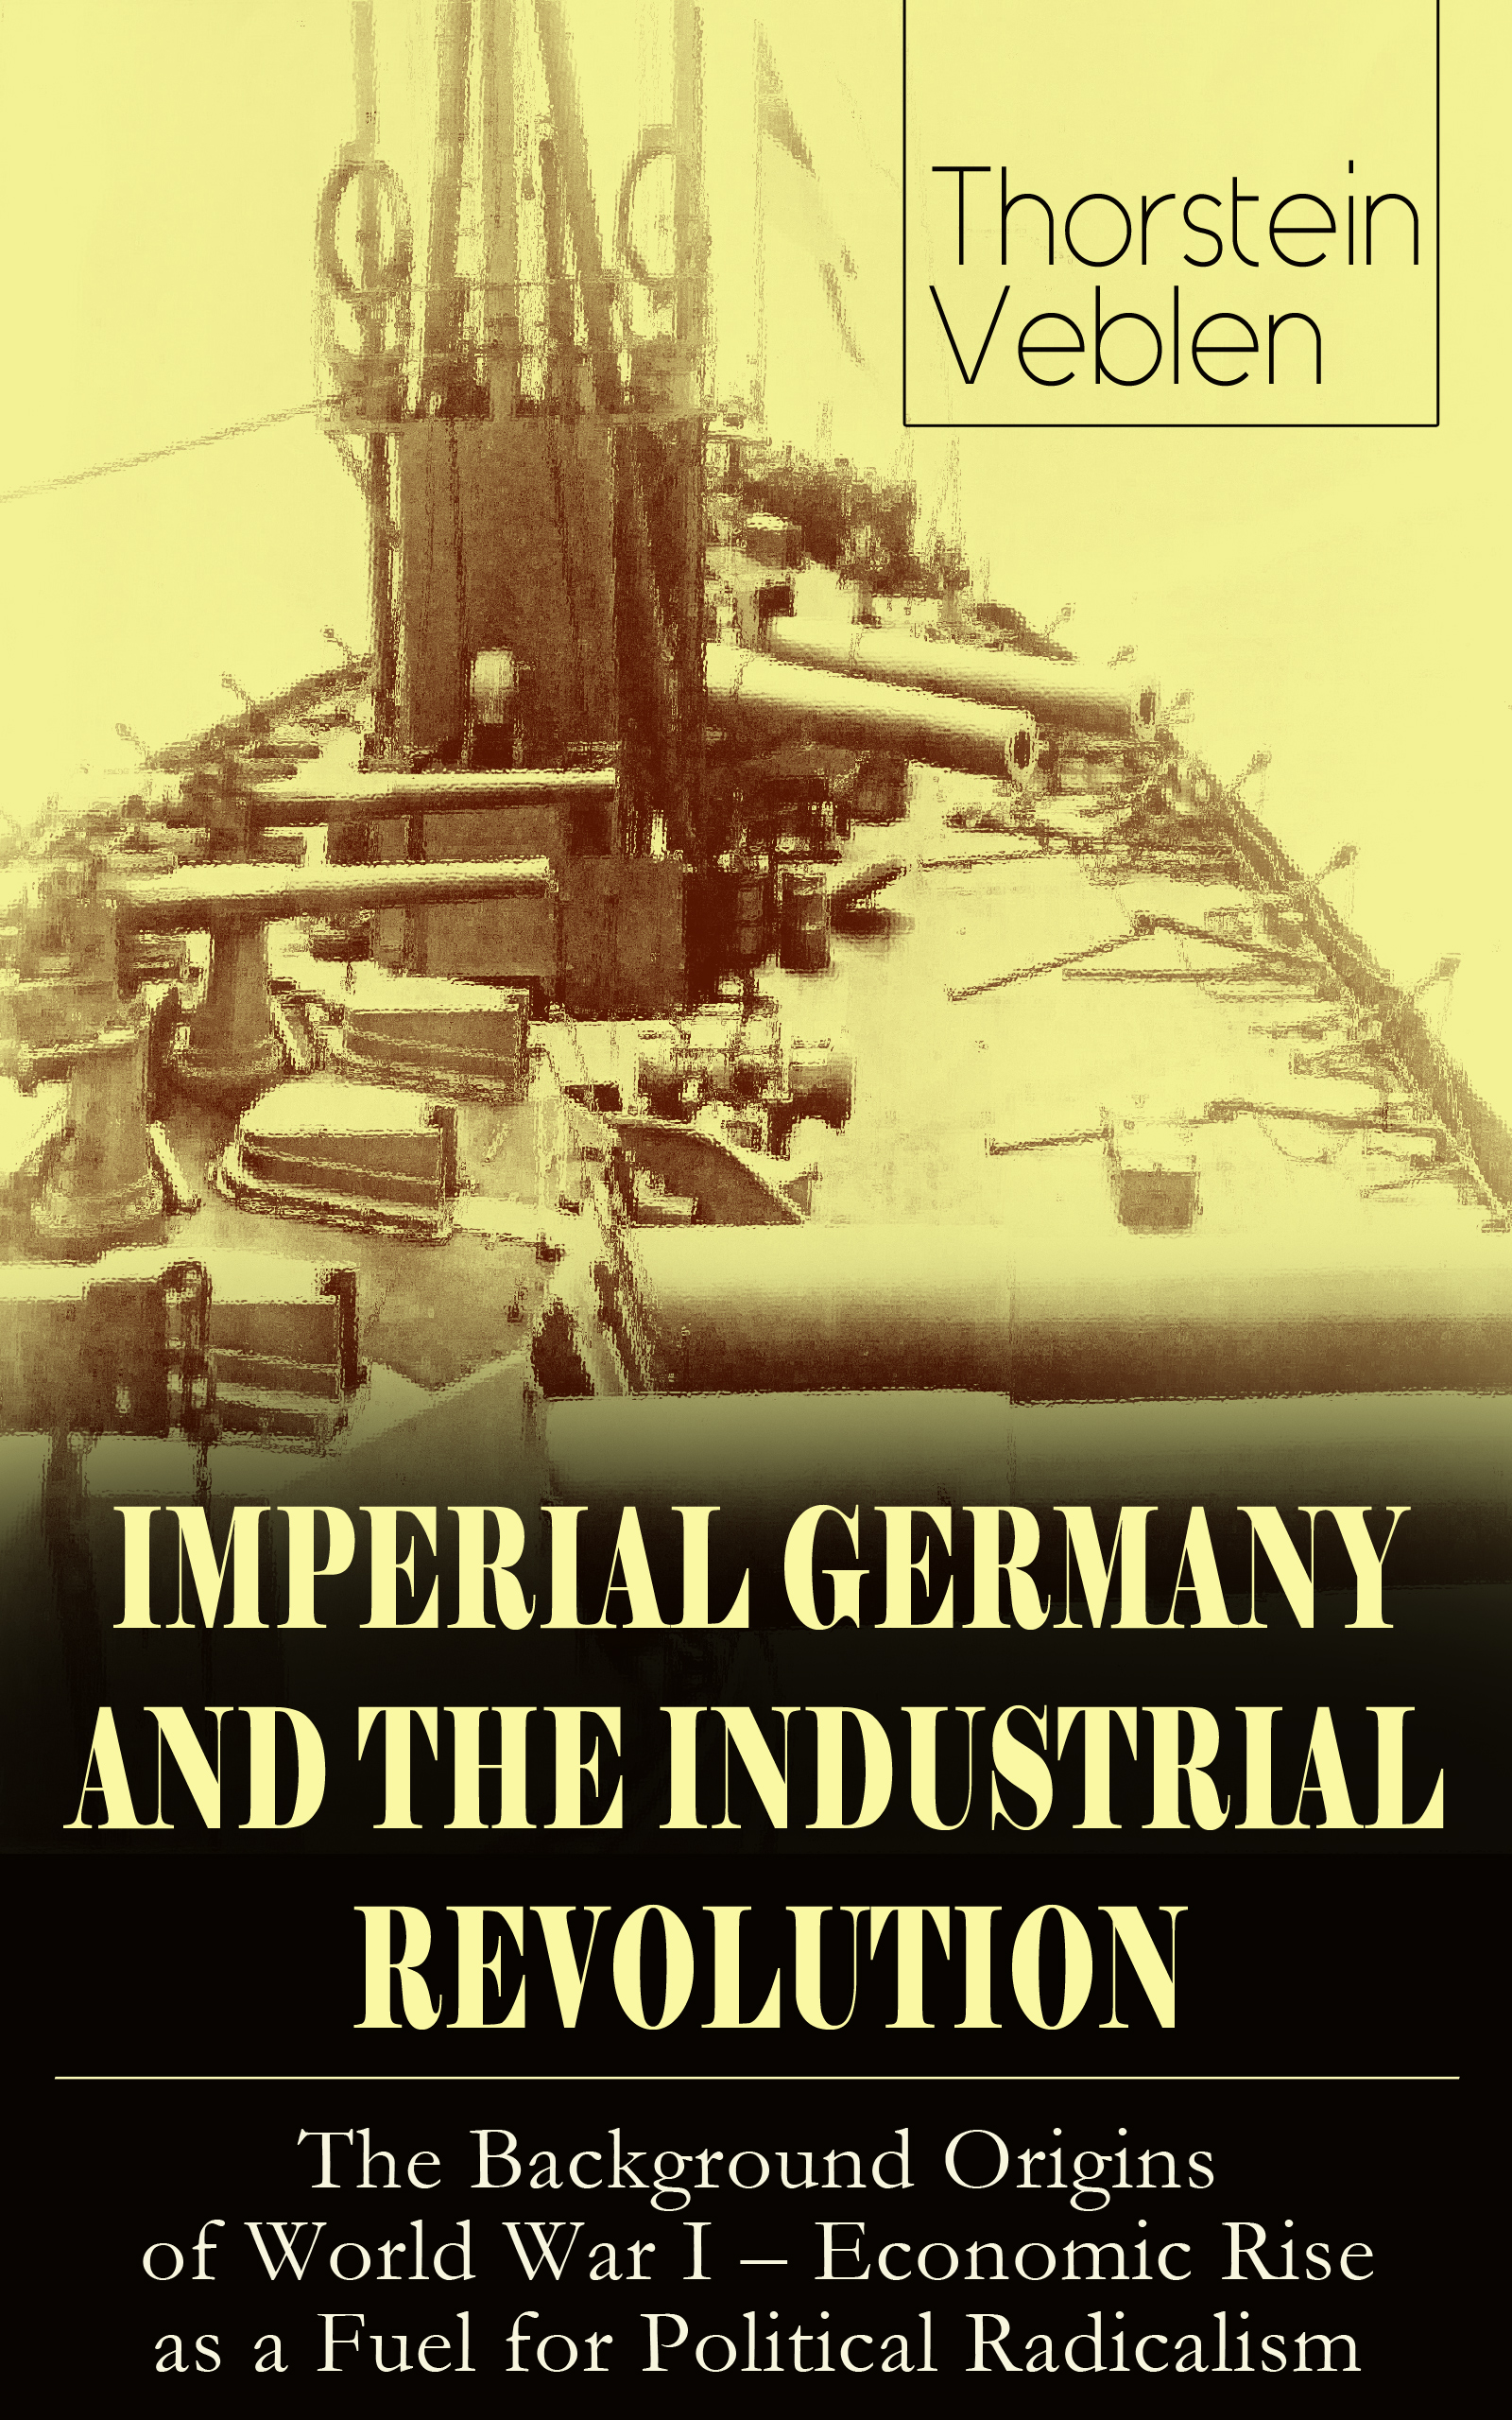 Thorstein Veblen IMPERIAL GERMANY AND THE INDUSTRIAL REVOLUTION: The Background Origins of World War I - Economic Rise as a Fuel for Political Radicalism